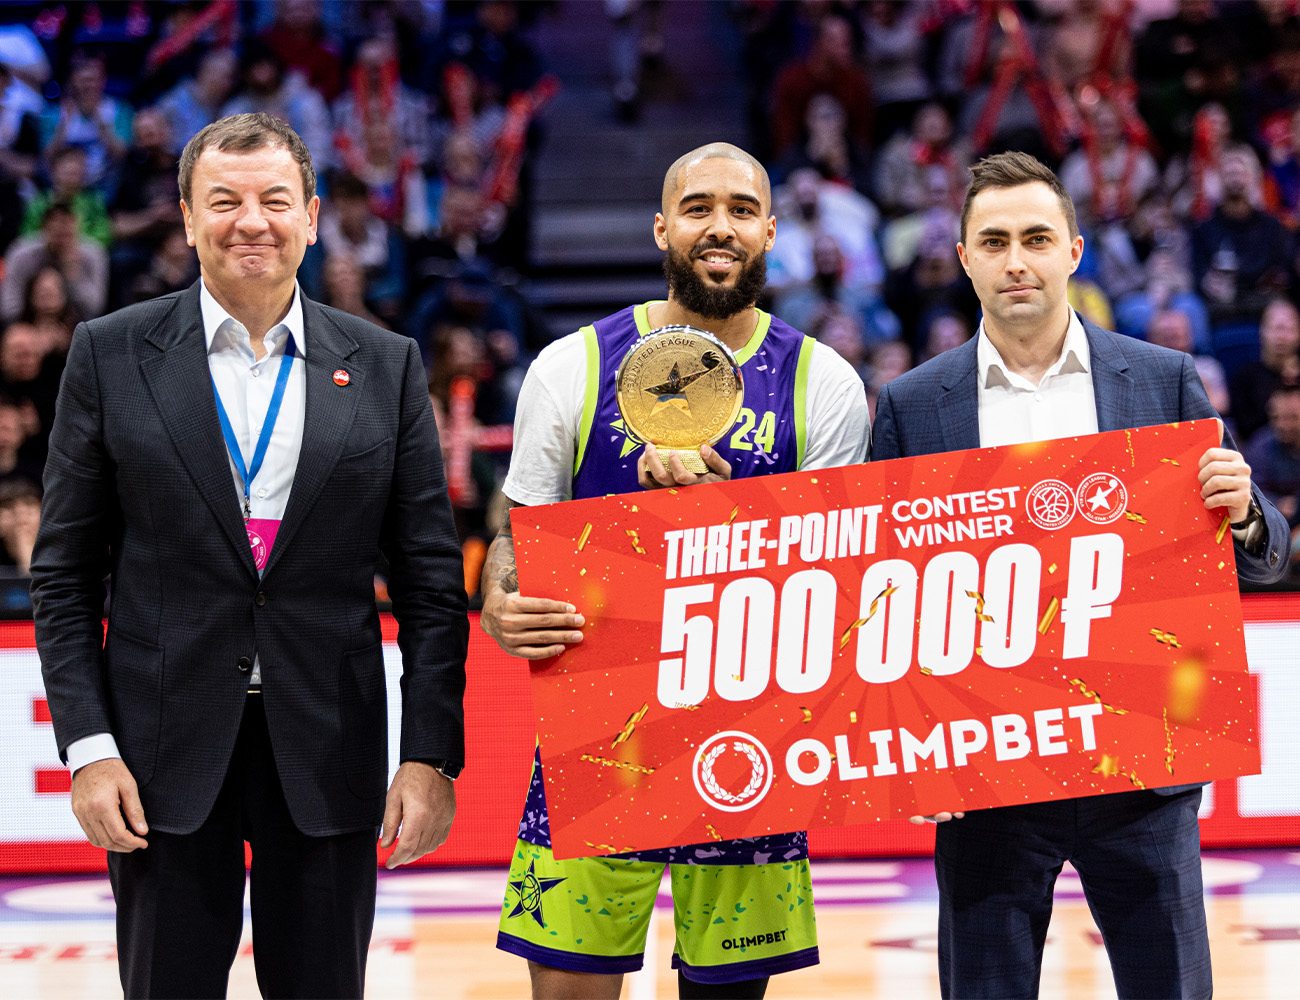 Dallas Moore wins the Olimpbet Three-Point Contest at the All-Star Game in Moscow